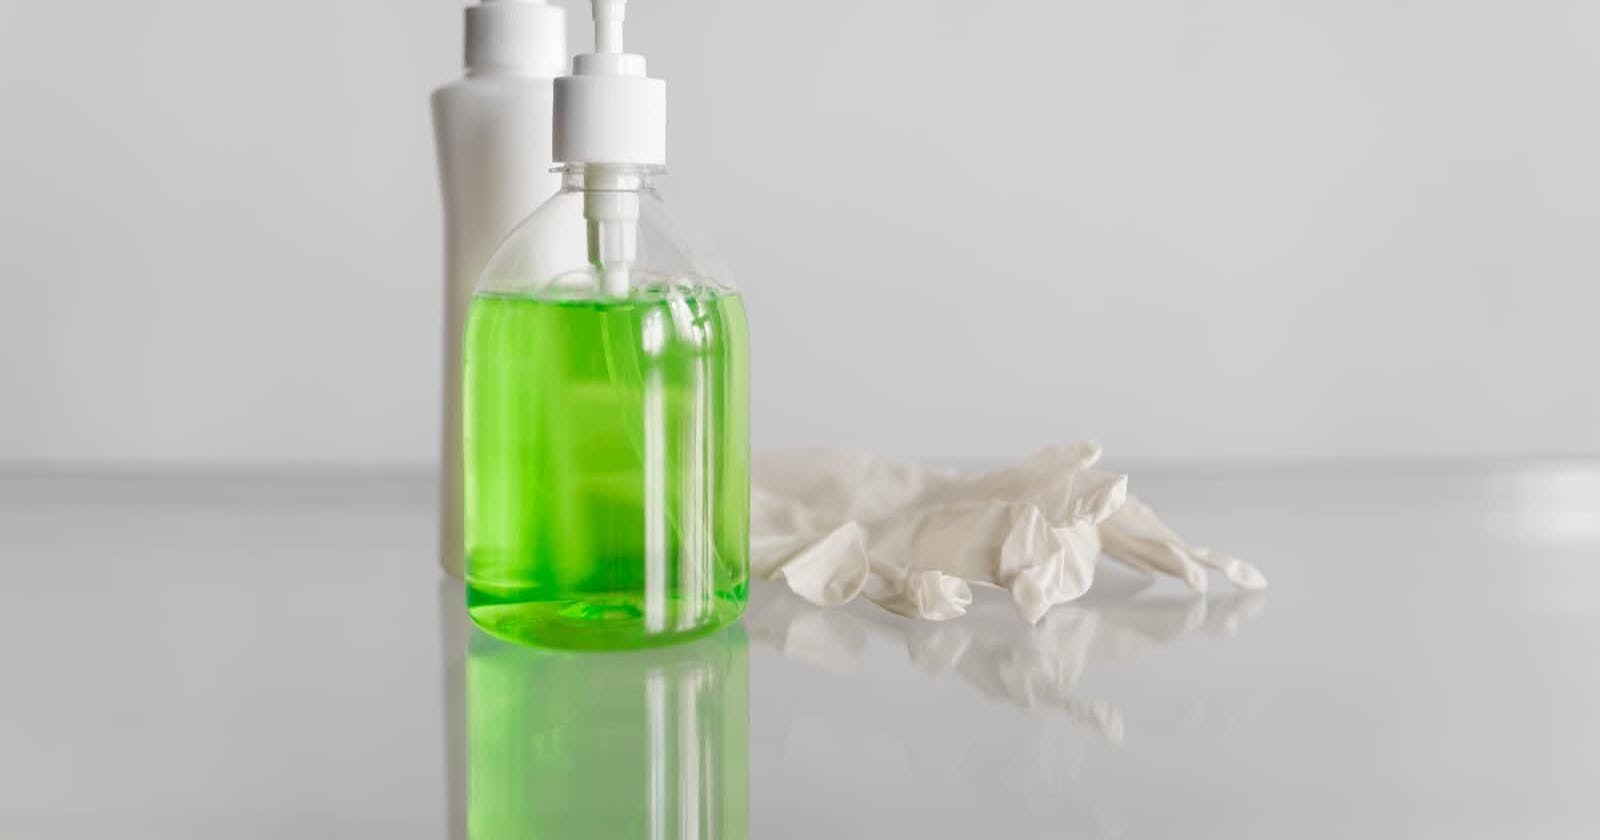 Antiseptic Guide: Everything You Need to Know About Using Antiseptics